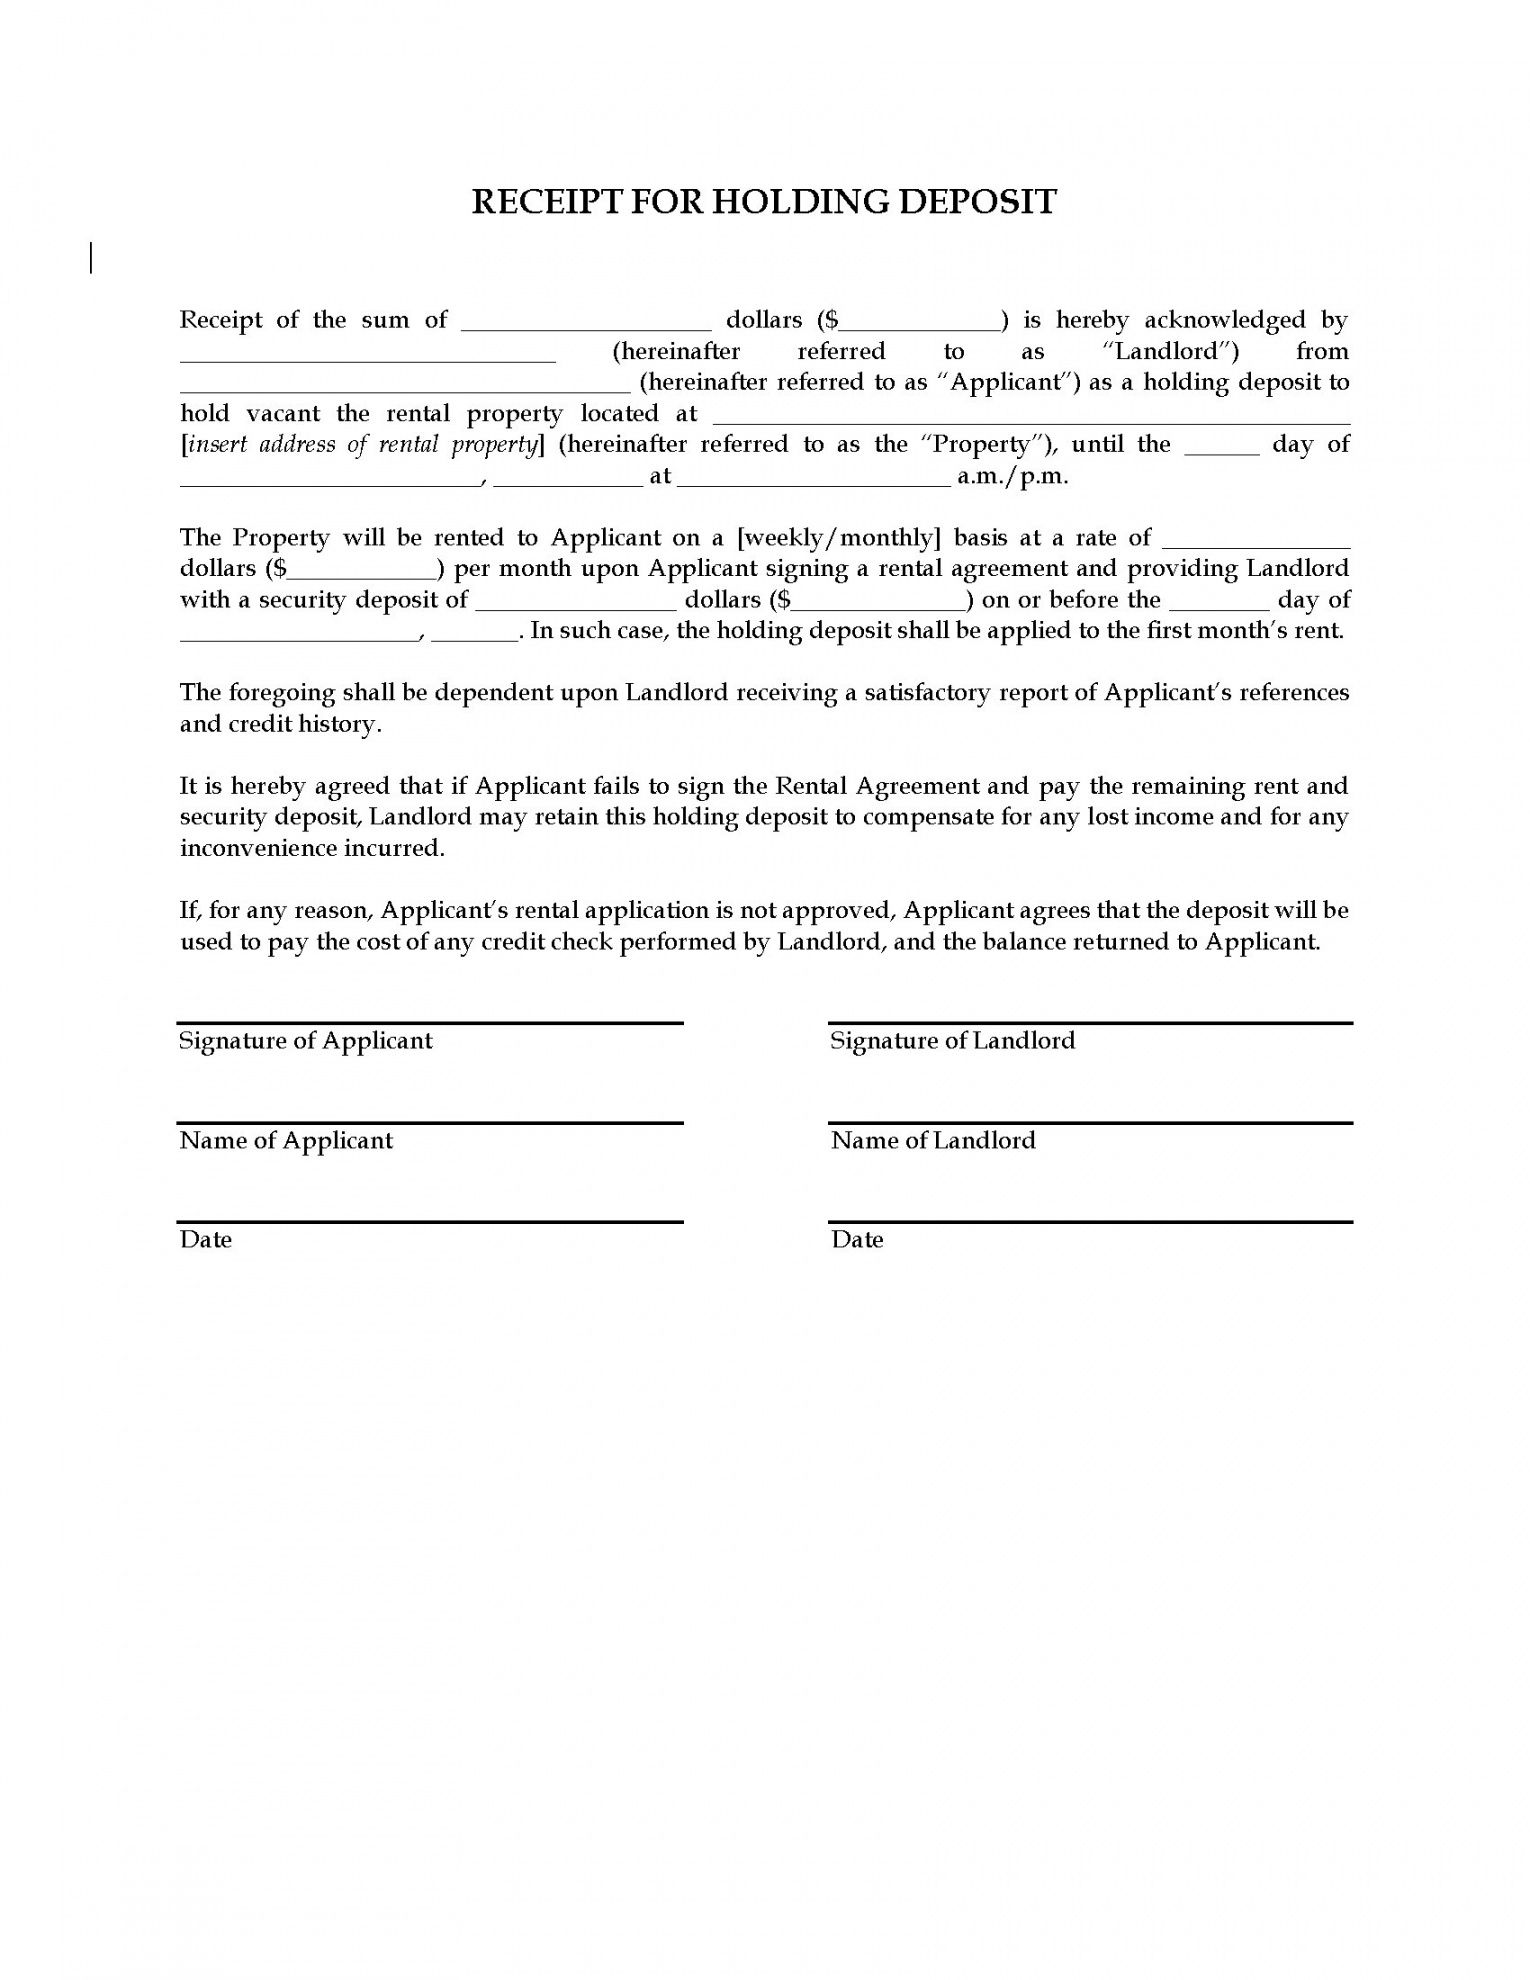 editable receipt for holding deposit on rental property  legal forms holding deposit form template example